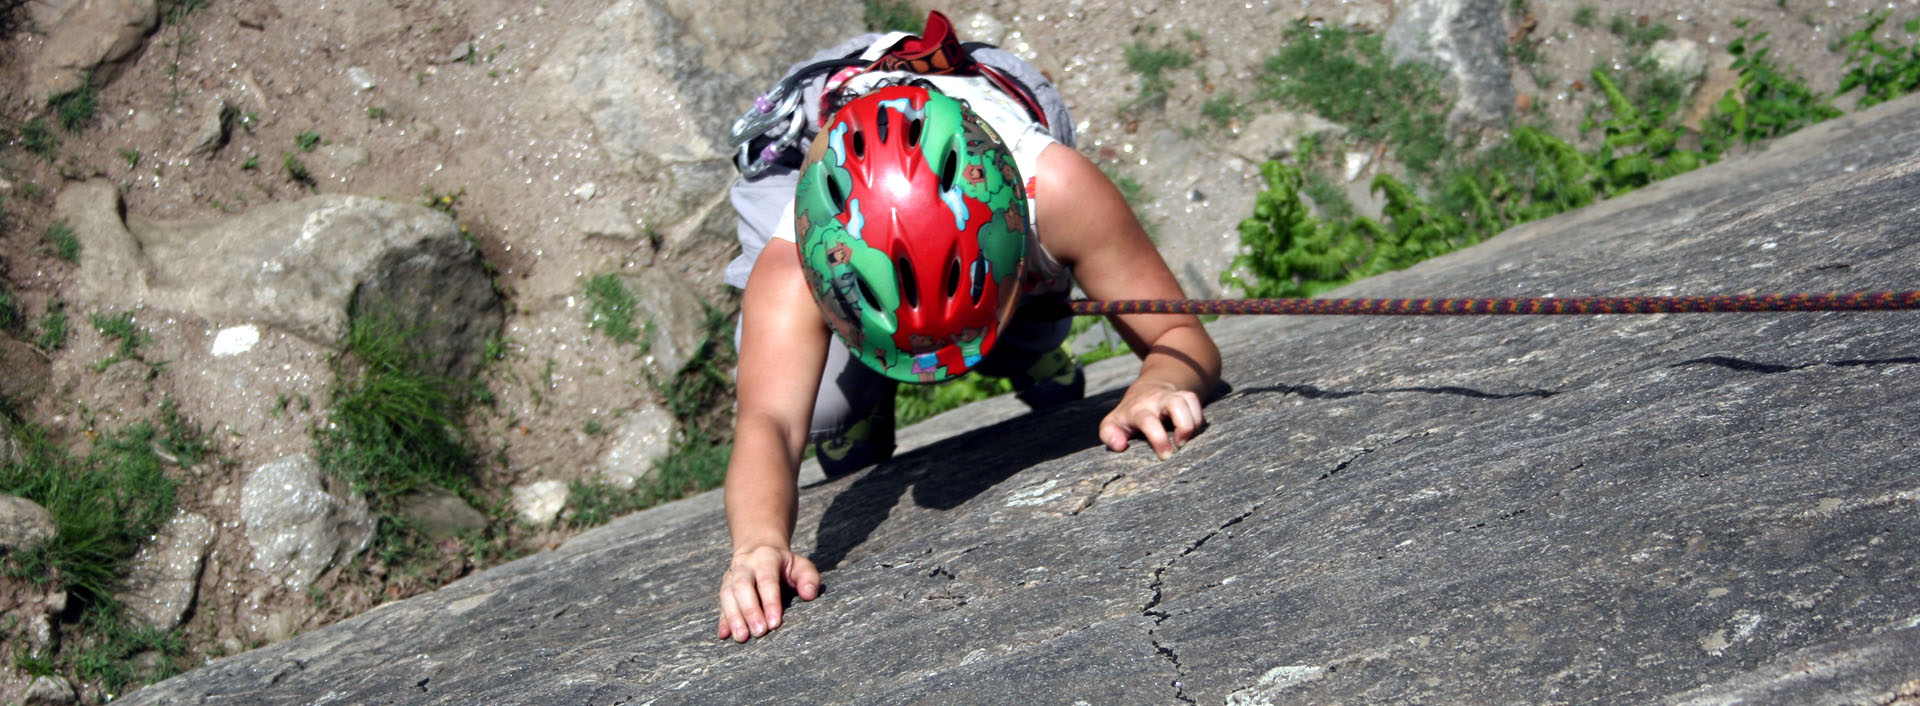 During a rock climbing course, a participant climbs with friction holds.